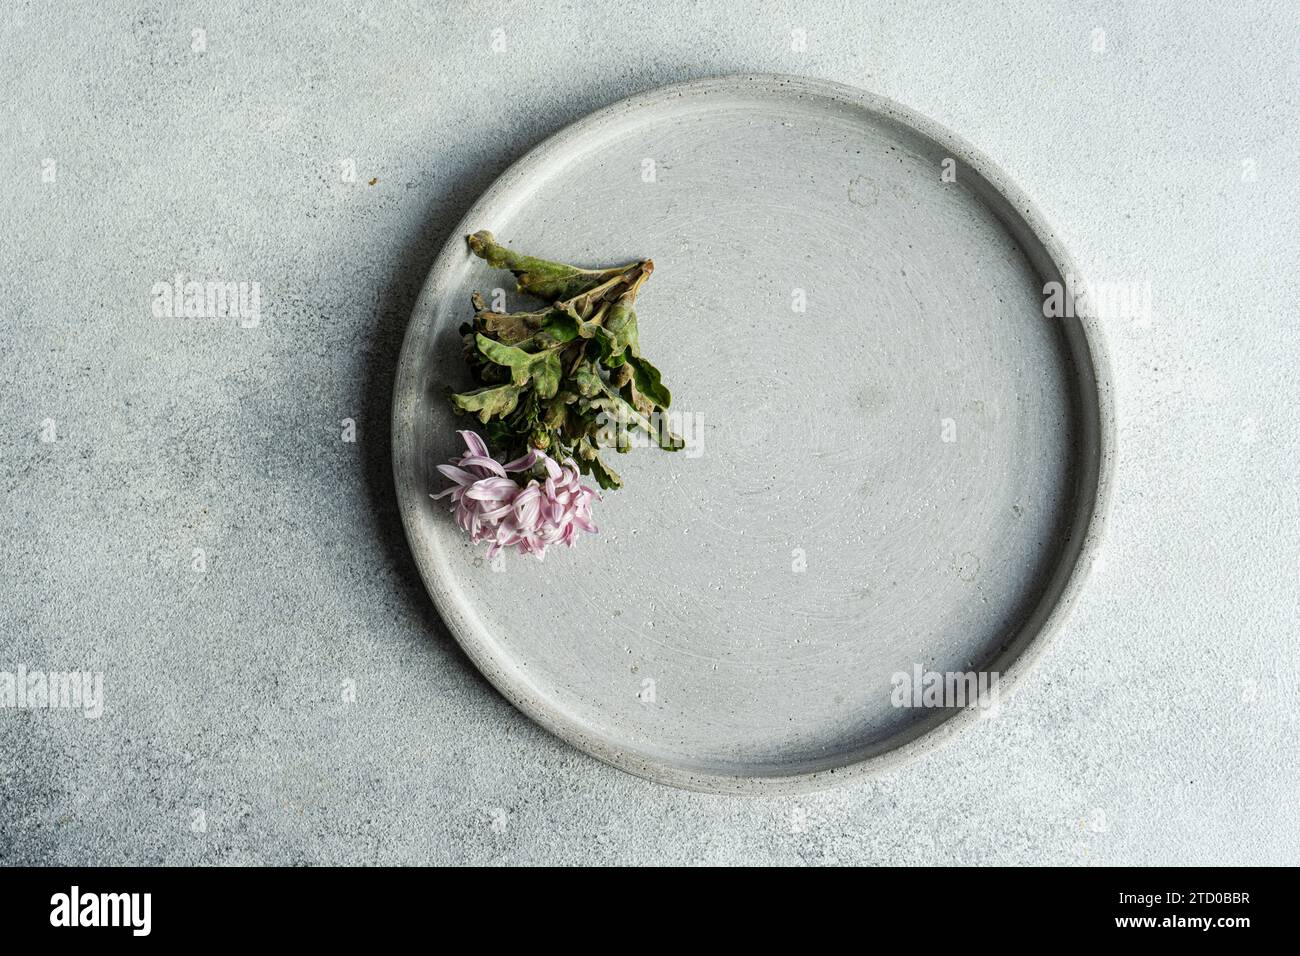 A minimalist food presentation on a gray ceramic plate over a textured surface. Stock Photo